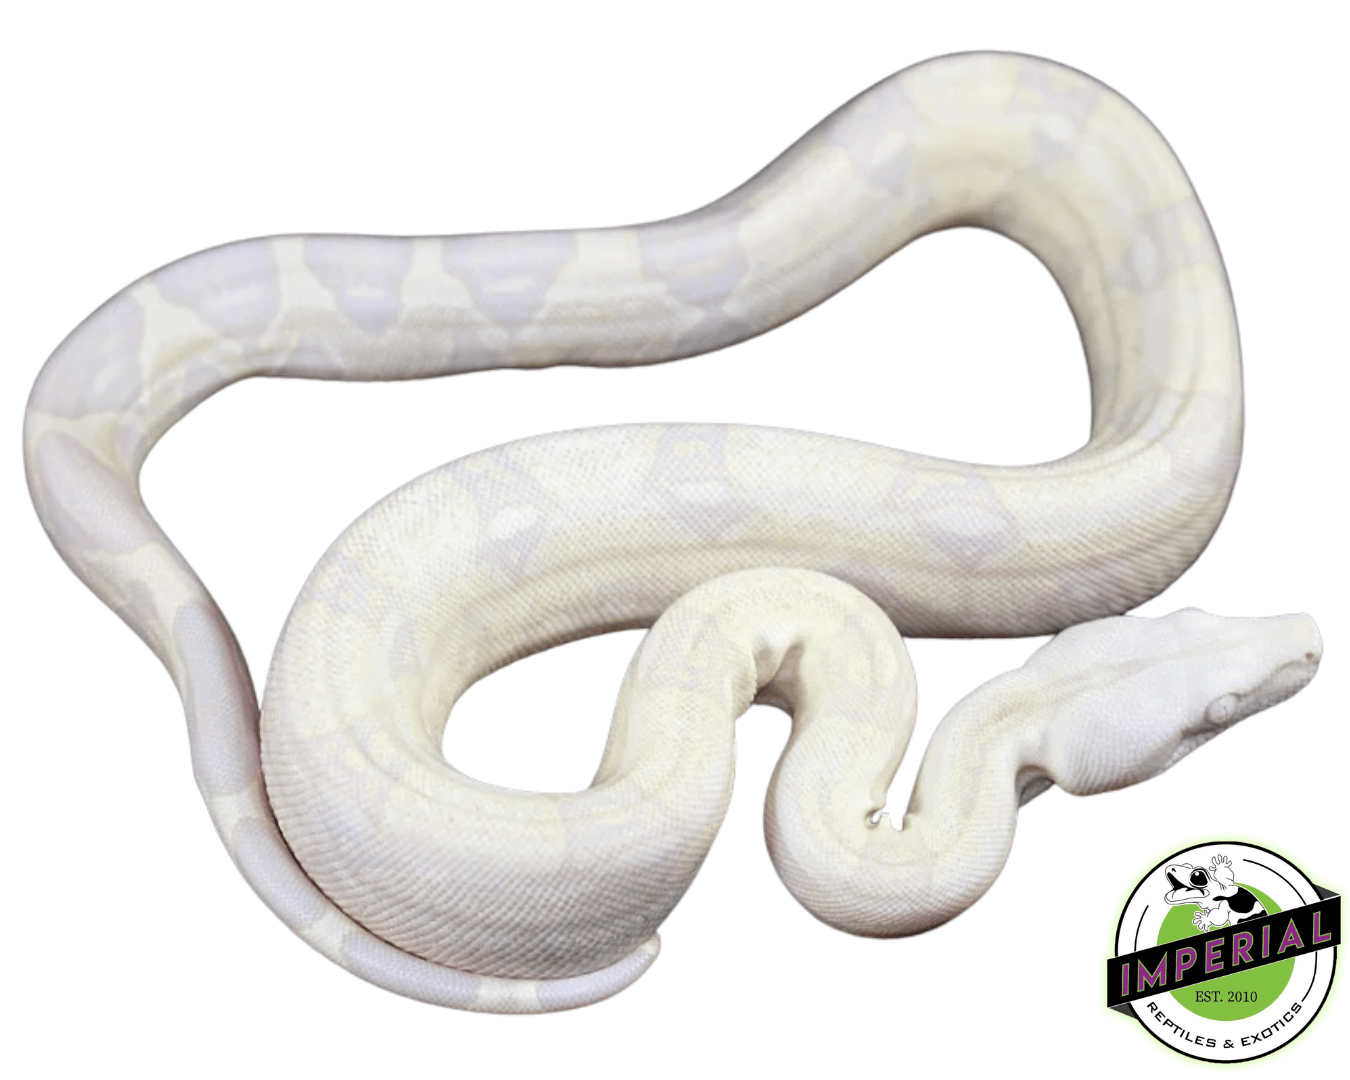 snow colombian boa constrictor for sale, buy reptiles online